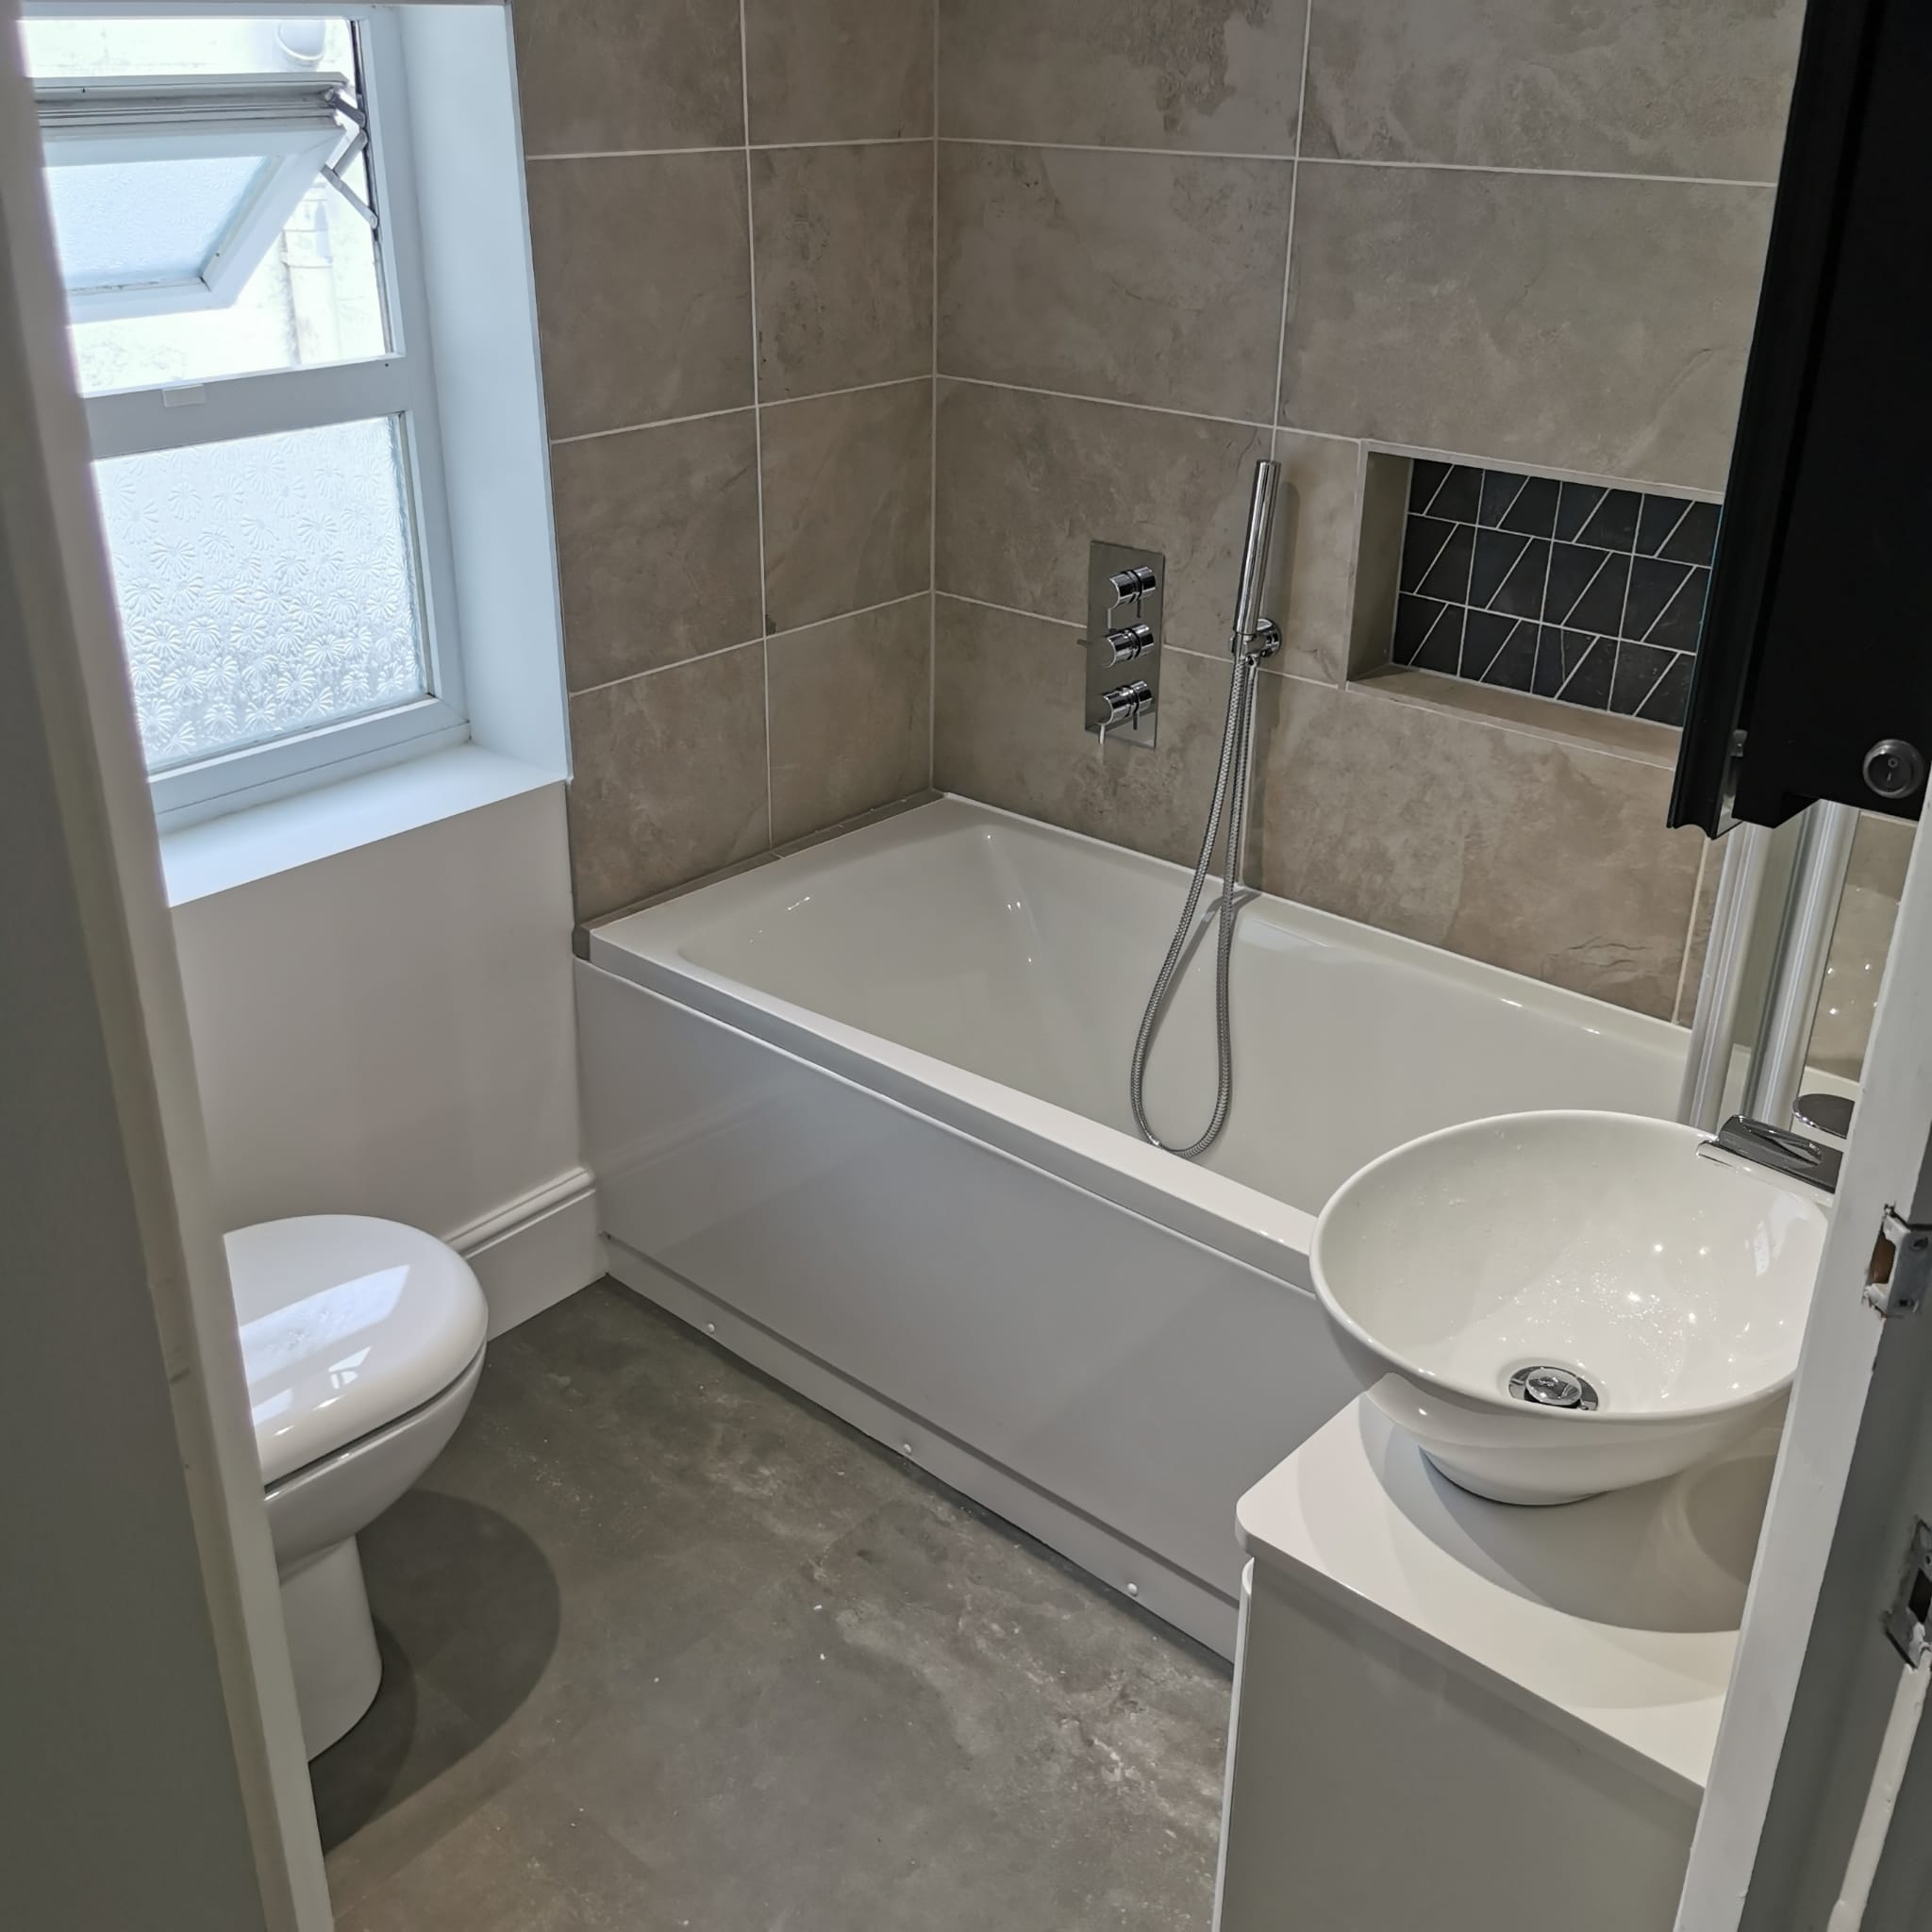 Ealing - Complete Bathroom Renovation by Deal Installations and Maintenance Ltd.